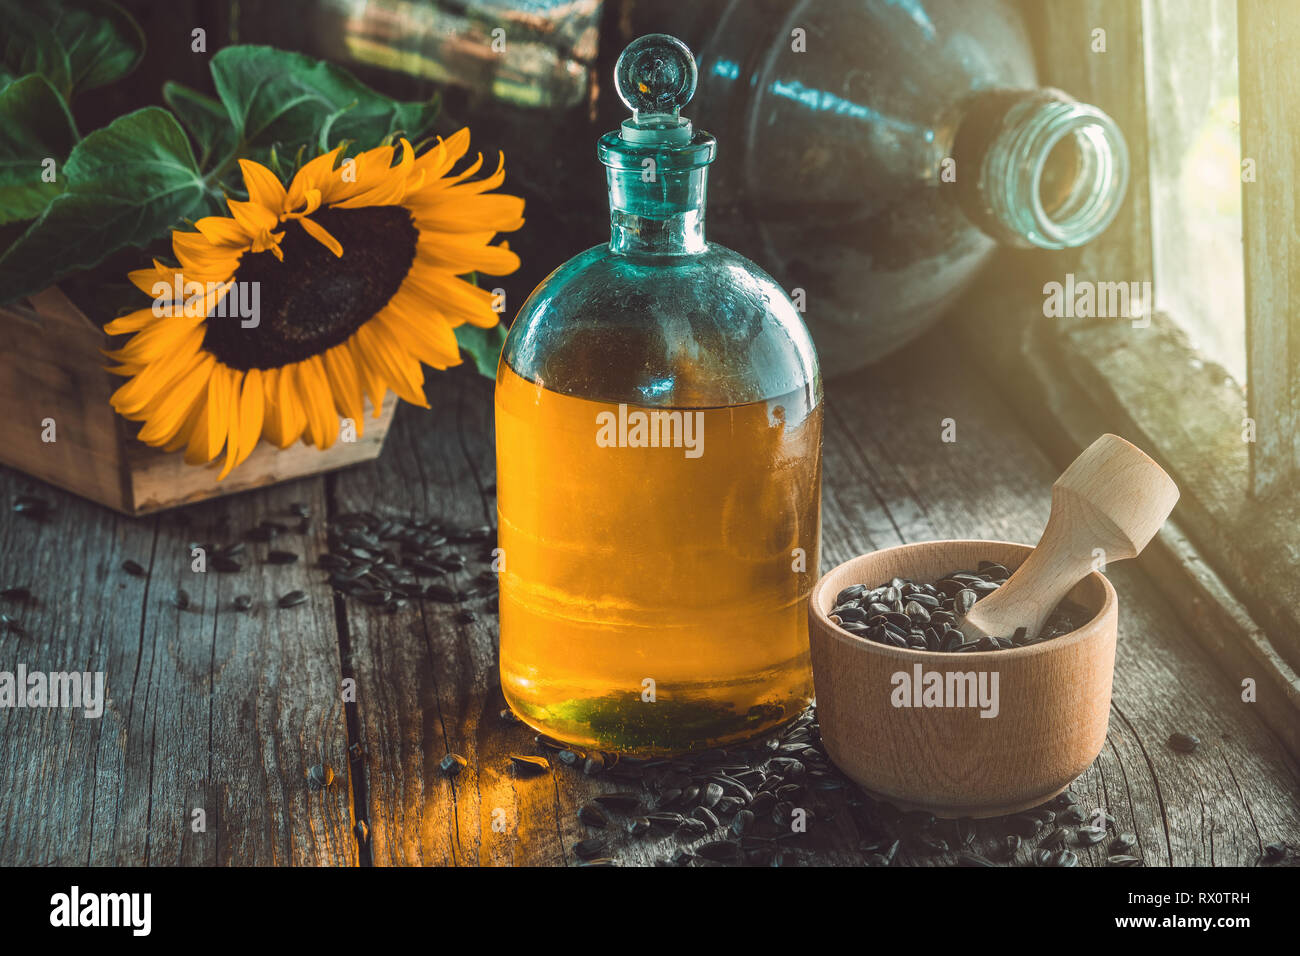 Bottle of sunflower oil, wooden mortar of seeds and yellow sunflower on wooden table inside the retro village house. Stock Photo